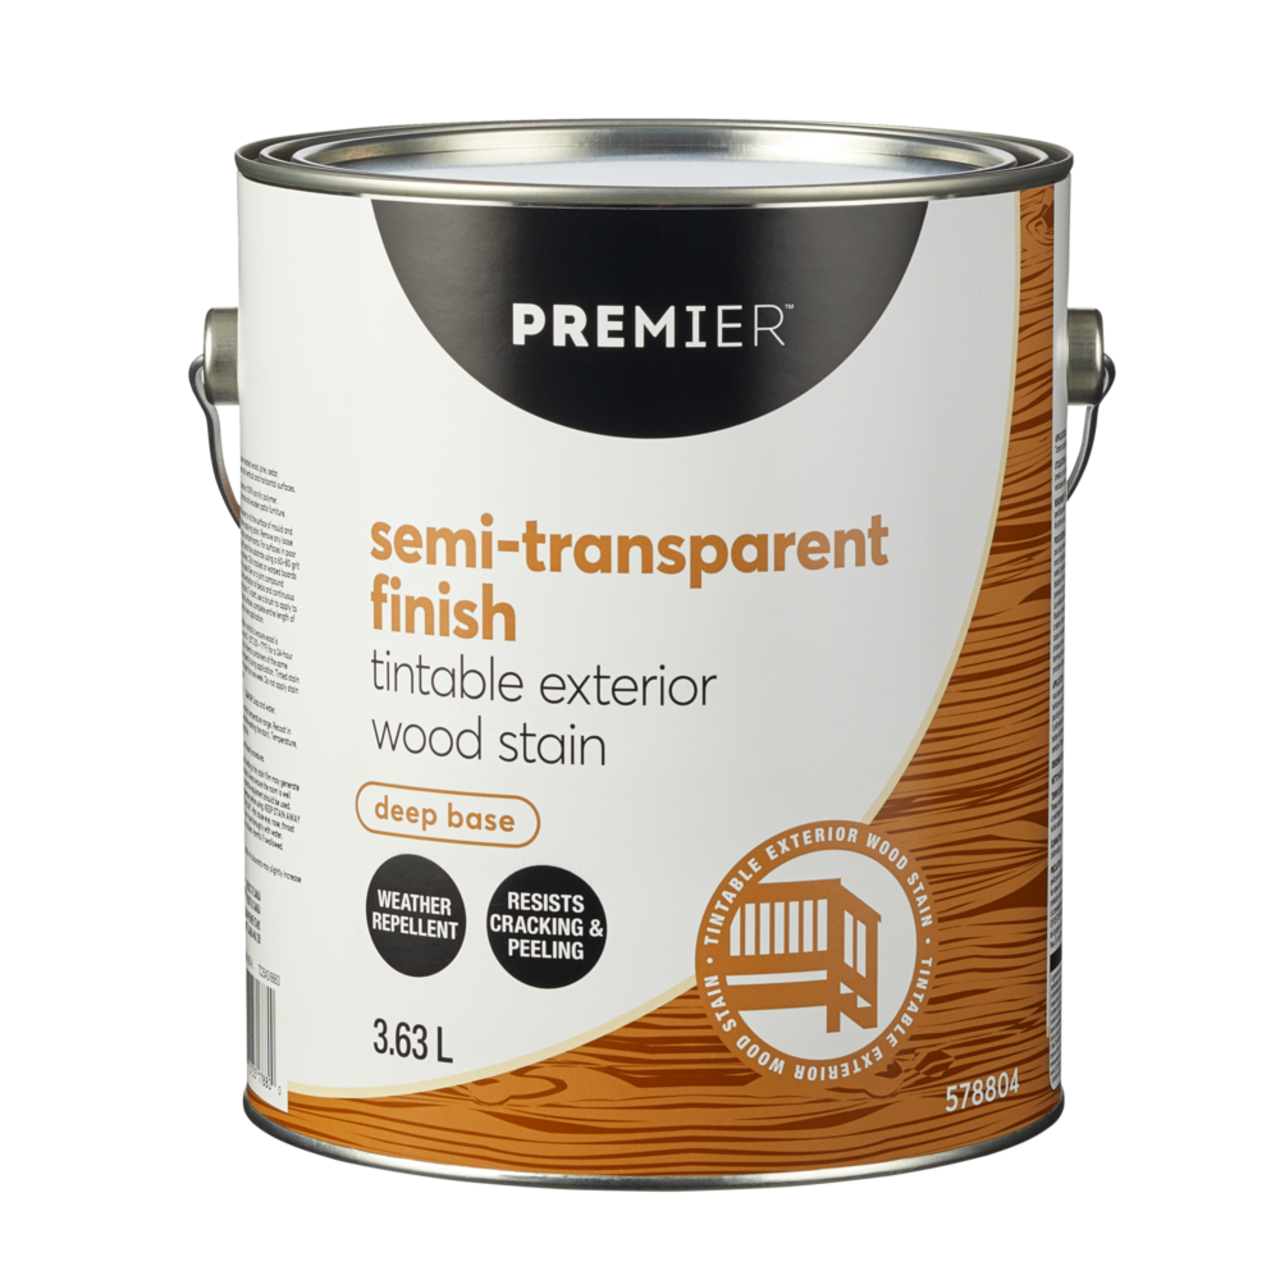 https://media-www.canadiantire.ca/product/fixing/paint/paints/0485905/premier-semi-transparent-exterior-stain-clear-base-gallon-d80c9f0a-5759-47c7-947f-3ad4d1522fff.png?imdensity=1&imwidth=640&impolicy=mZoom